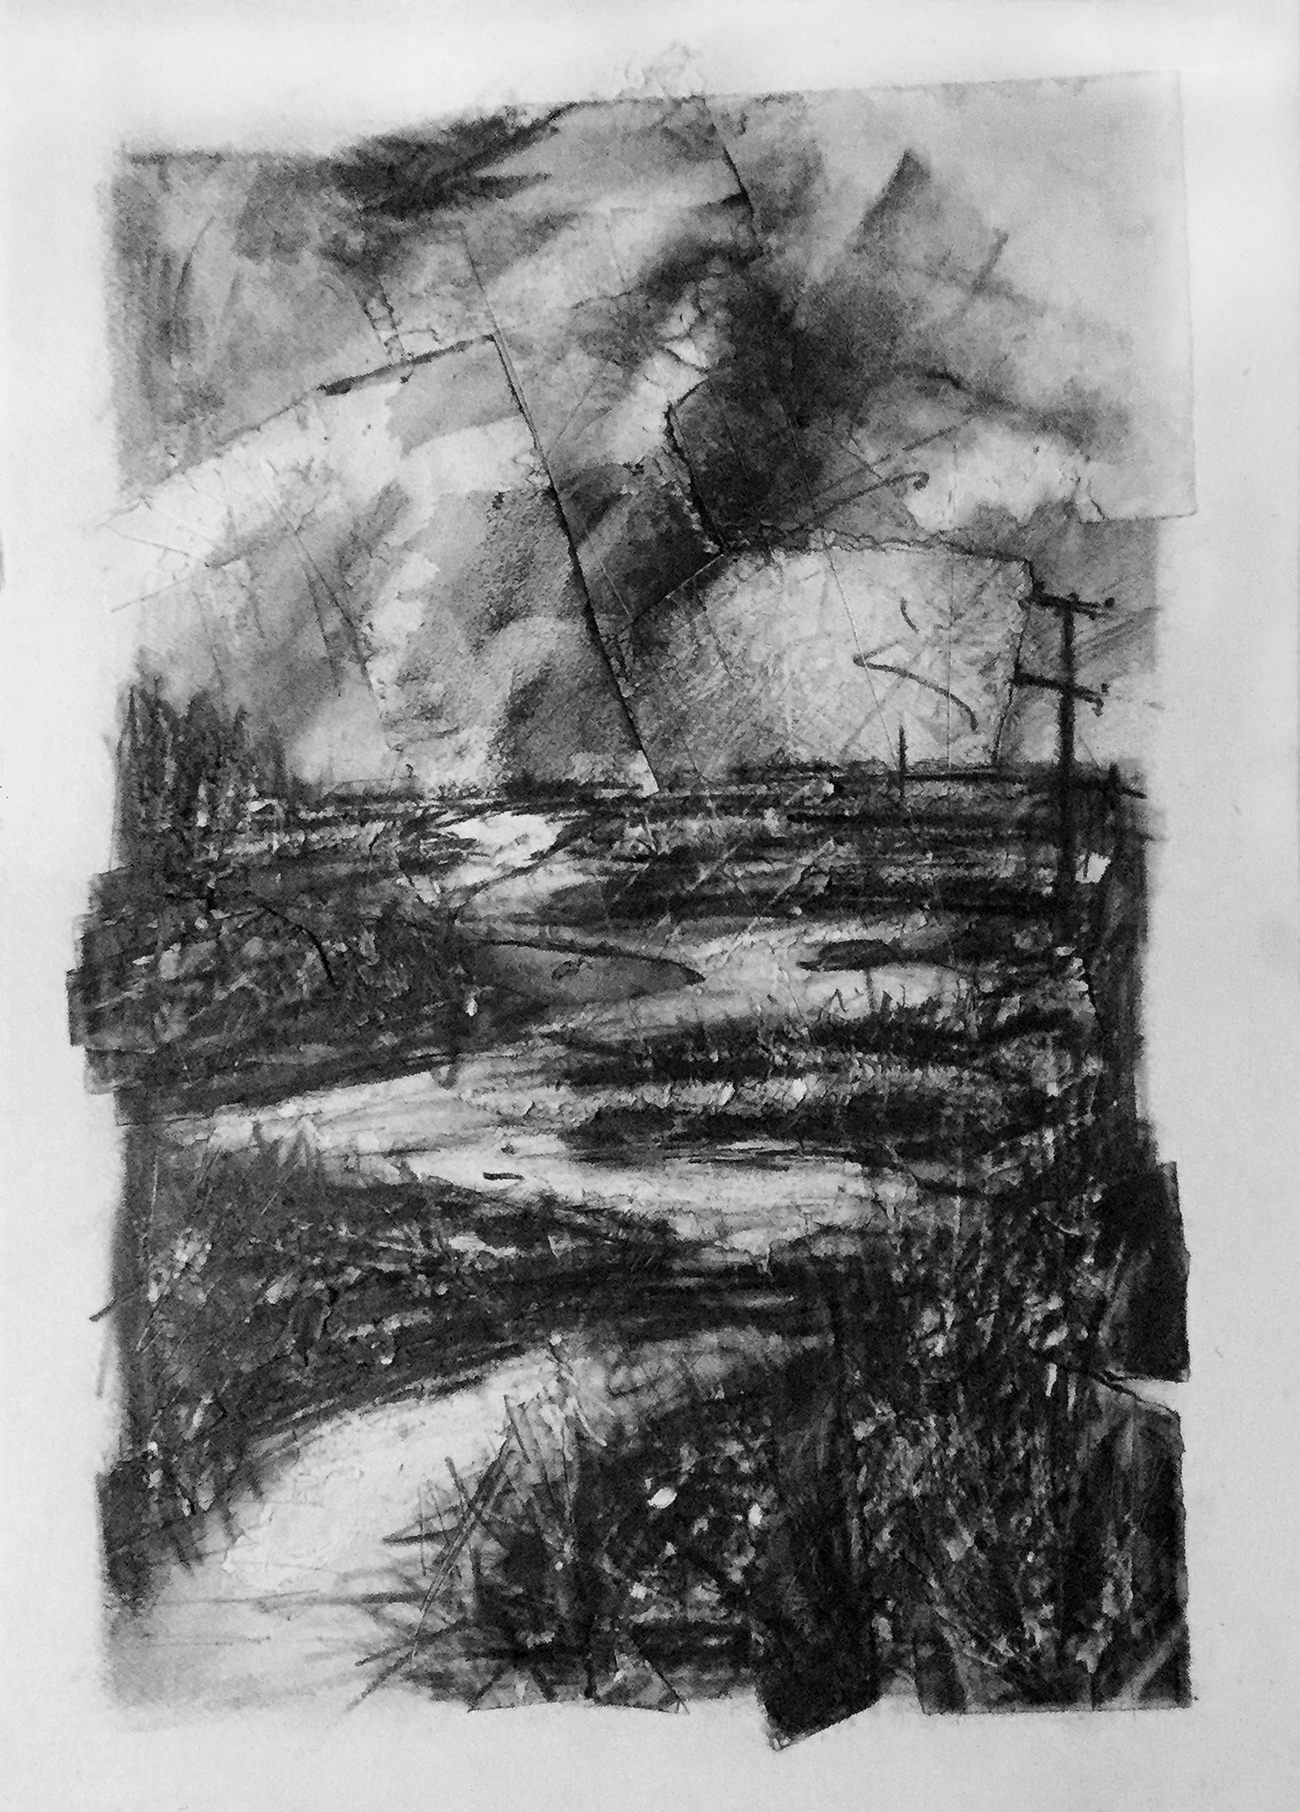 Sunk Island landscape near Channel Farm, John D. Petty This drawing is an older one (2015) and was an amalgam of many sketches done over four years or more, plus a lot of memory of just being there. There is very heavy scratching and gouging of the paper and in places new paper has been collaged on. Graphite on paper, 30x22 inches